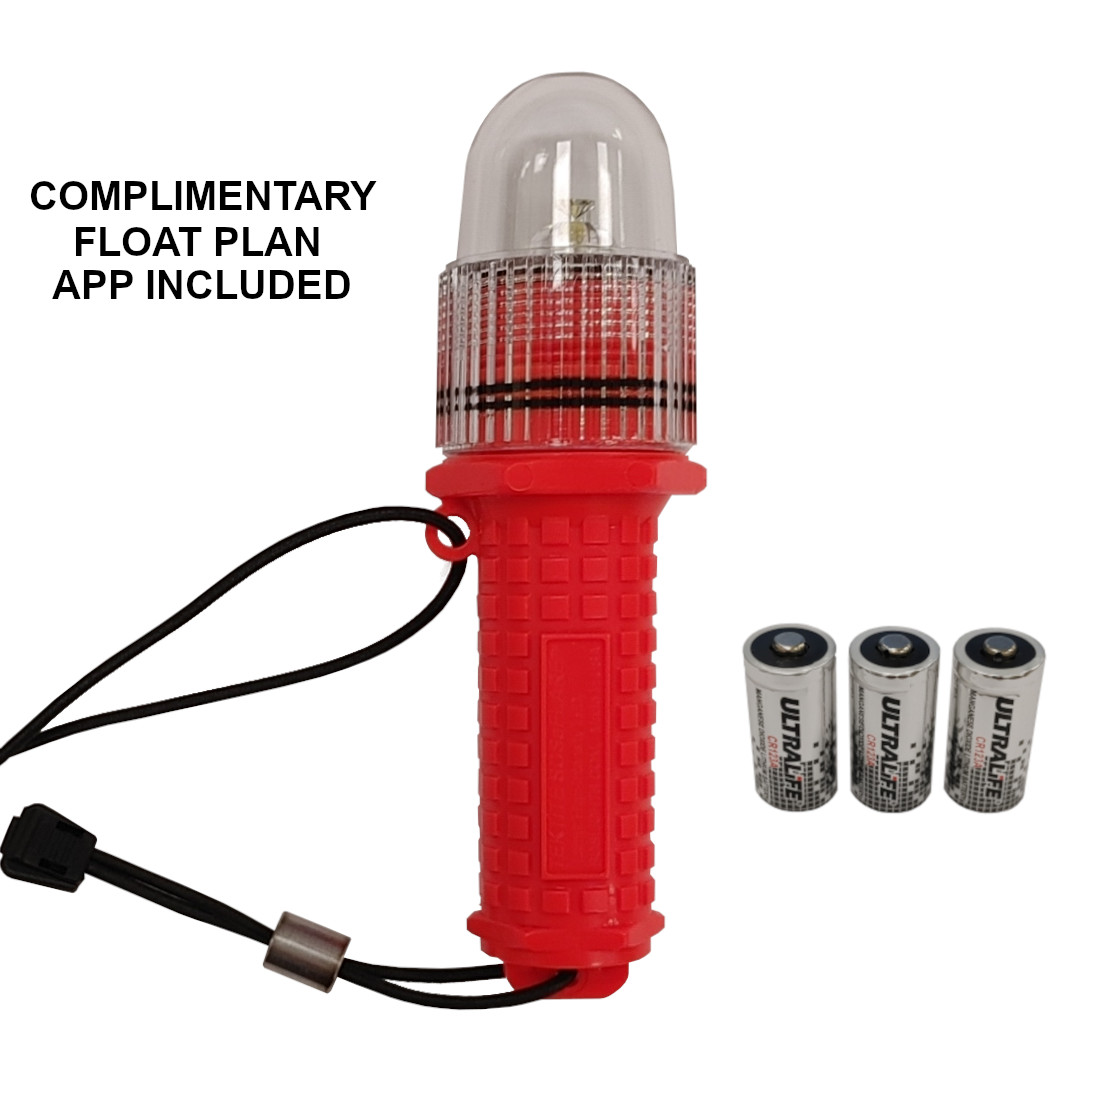 Boat flares coast guard approved - .com : USCG Boating Safety Kit -  Electronic Flare - First Aid Kit - W